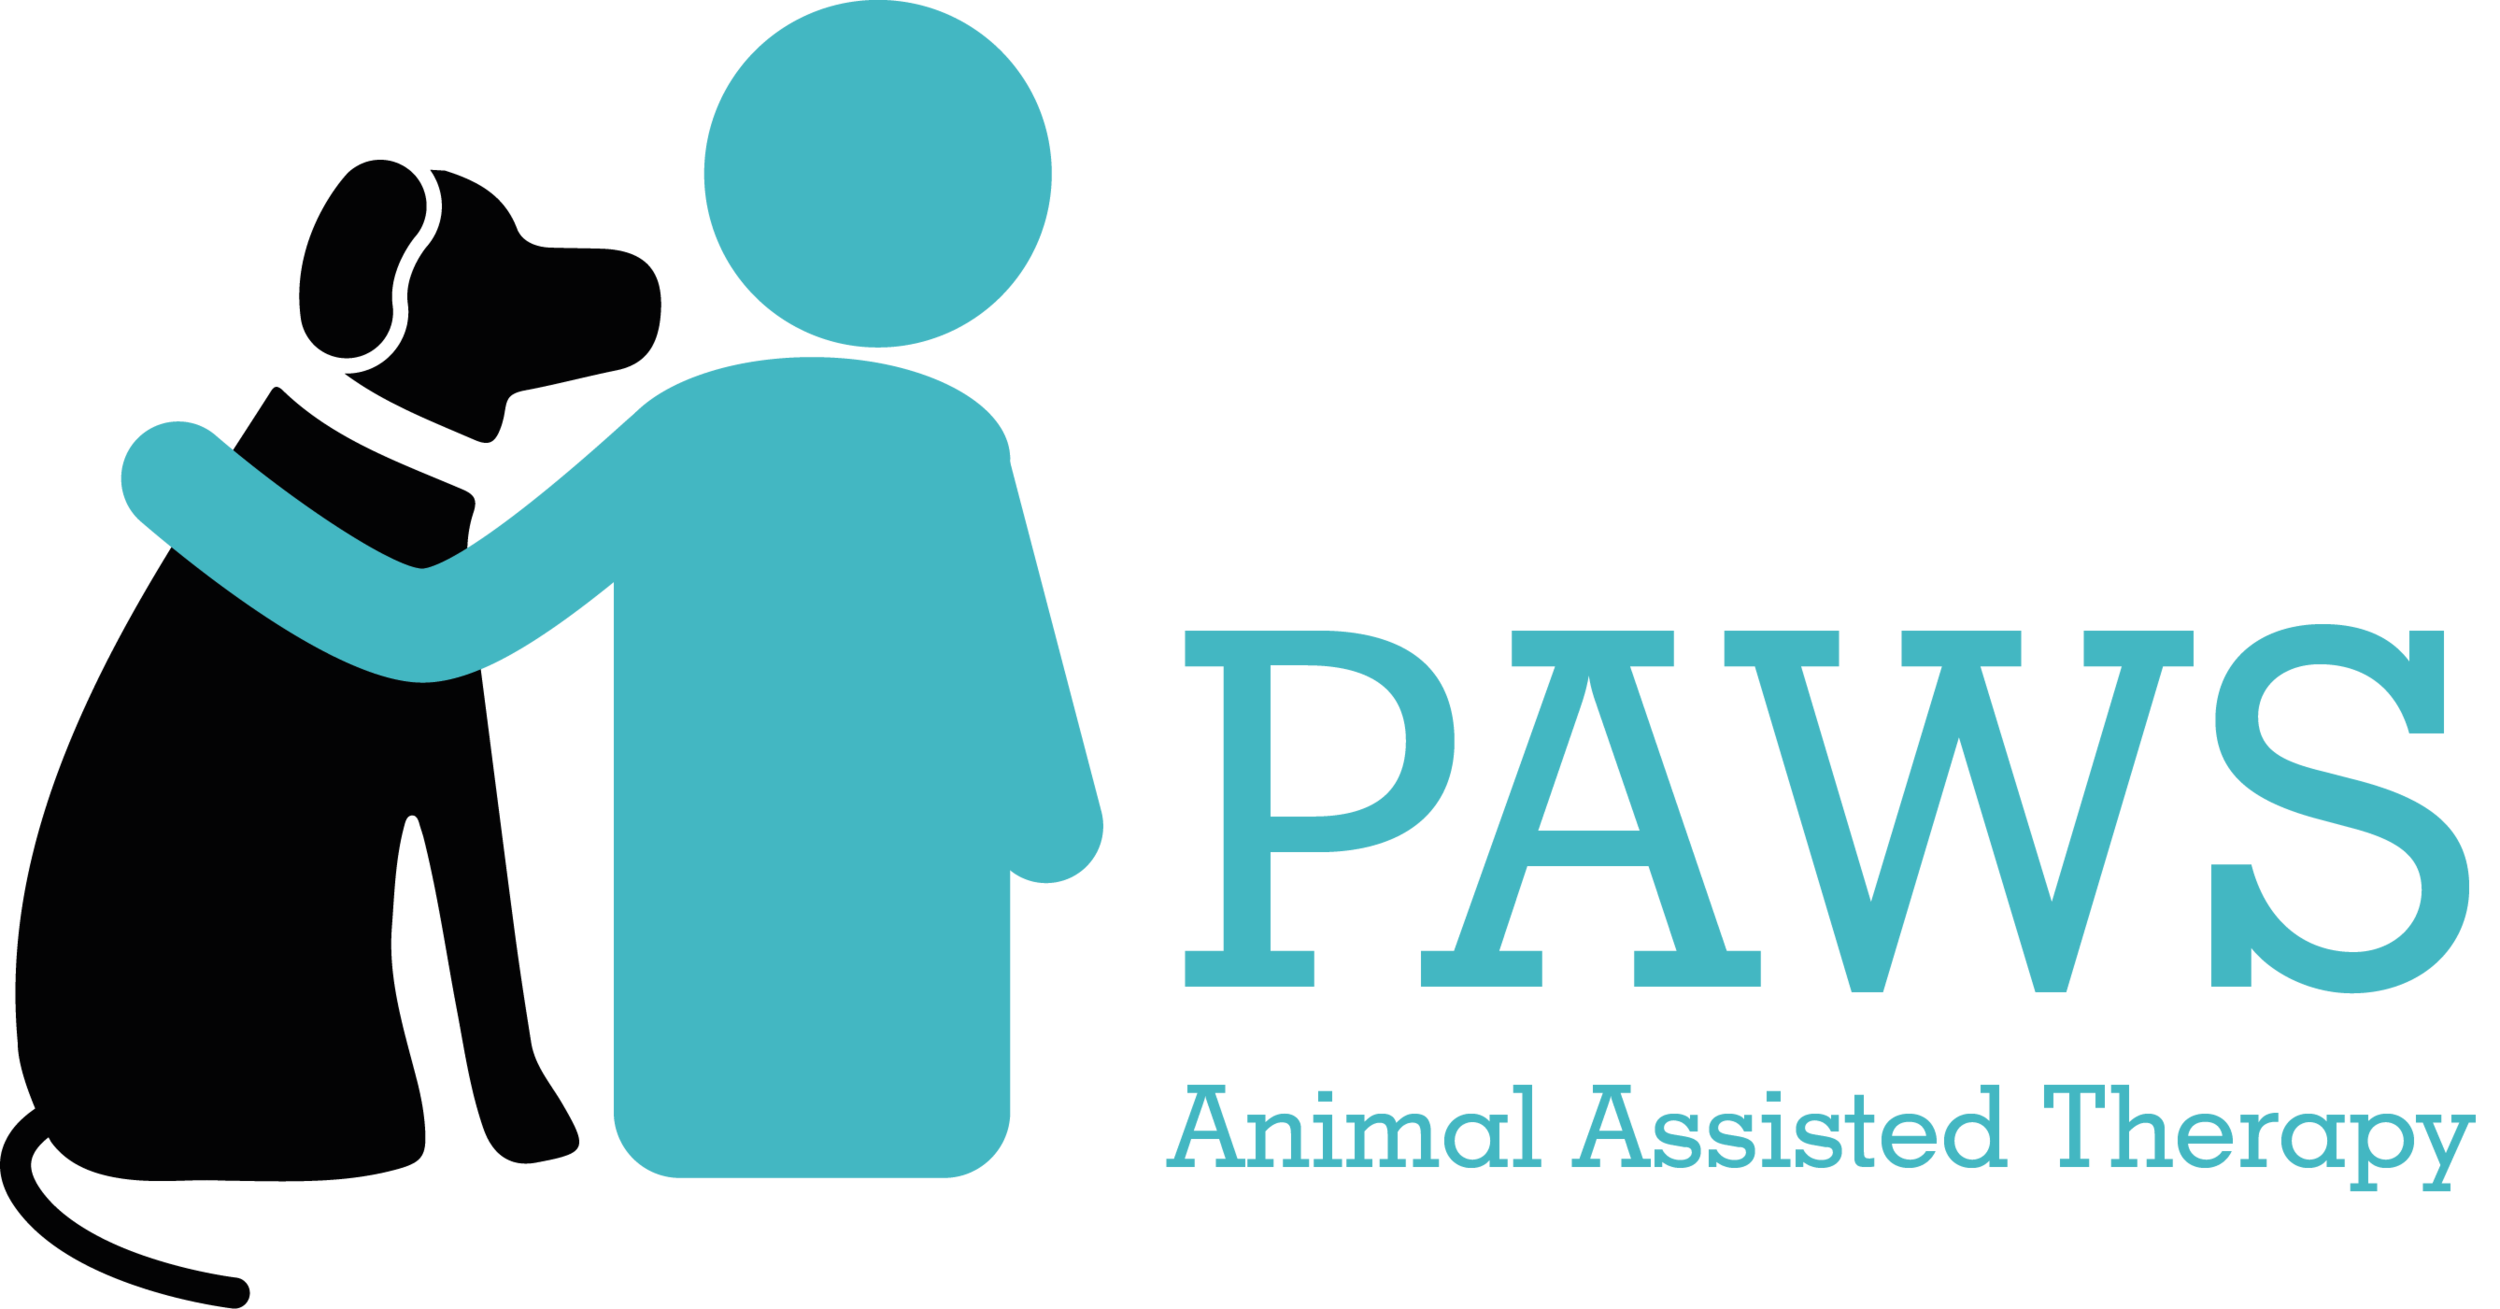 PAWS: Animal Assisted Therapy